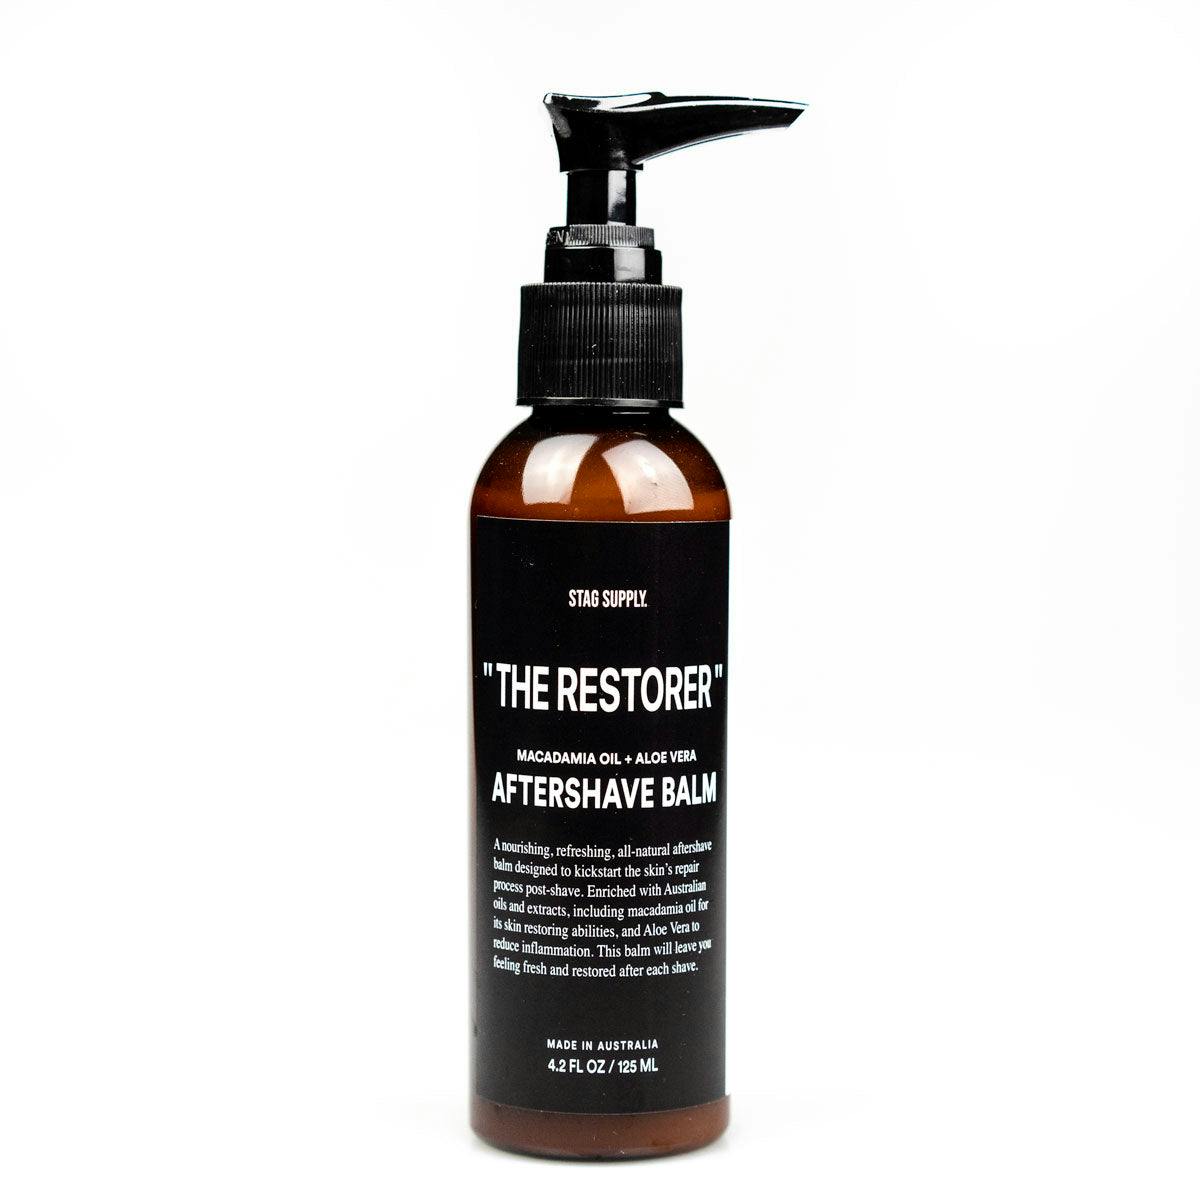 Stag Supply 'The Restorer' After Shave Balm 125ml